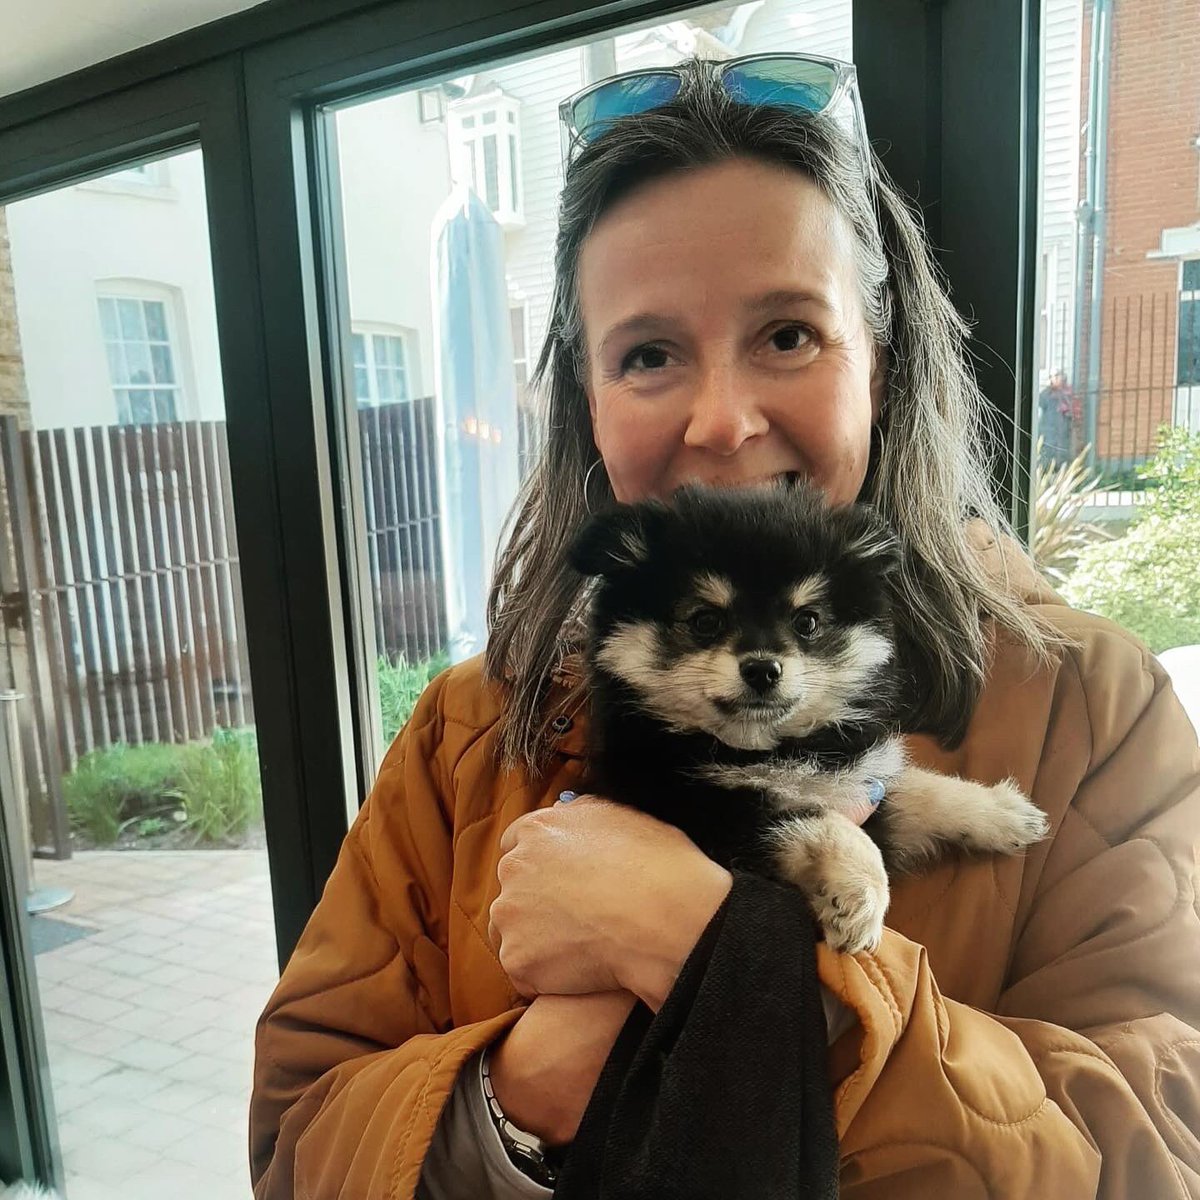 Got over my level 8 hangover (the one that requires dry toast) in time to meet the smallest dog you ever did see, who lives very happily with @Lornamedia #GoodNewsSaturday